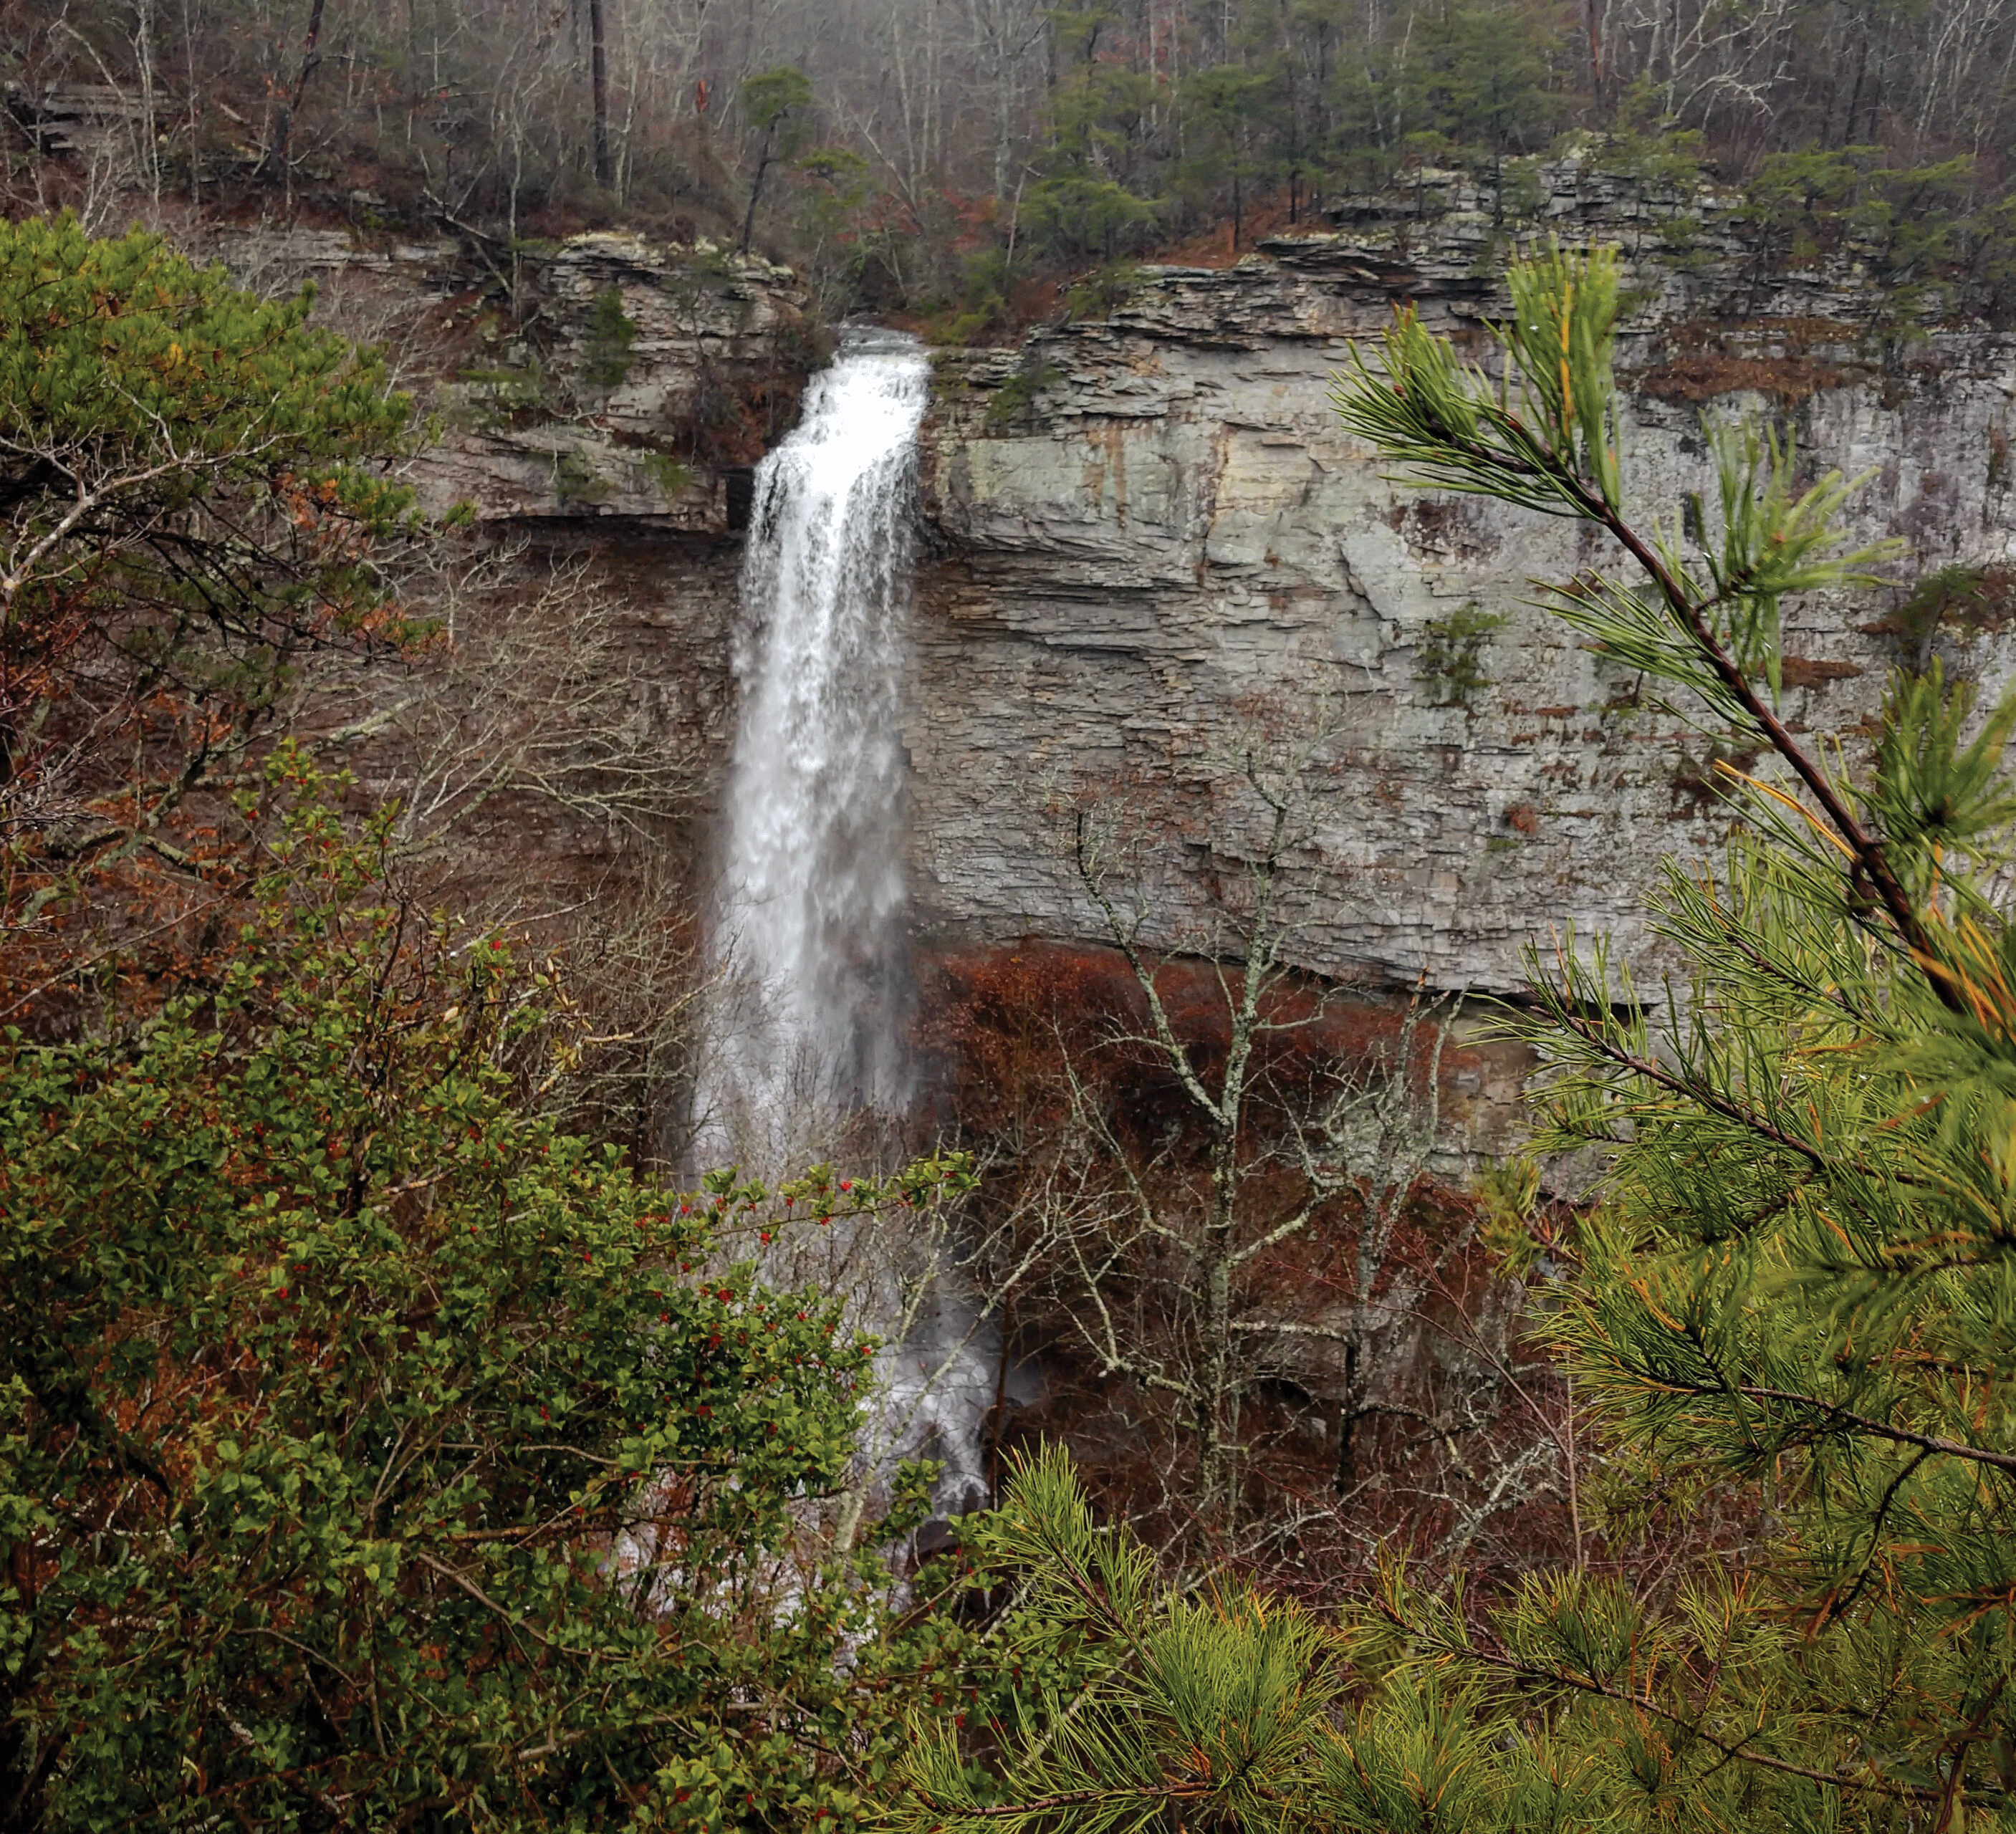 Photograph of a waterfall in a wooded area.